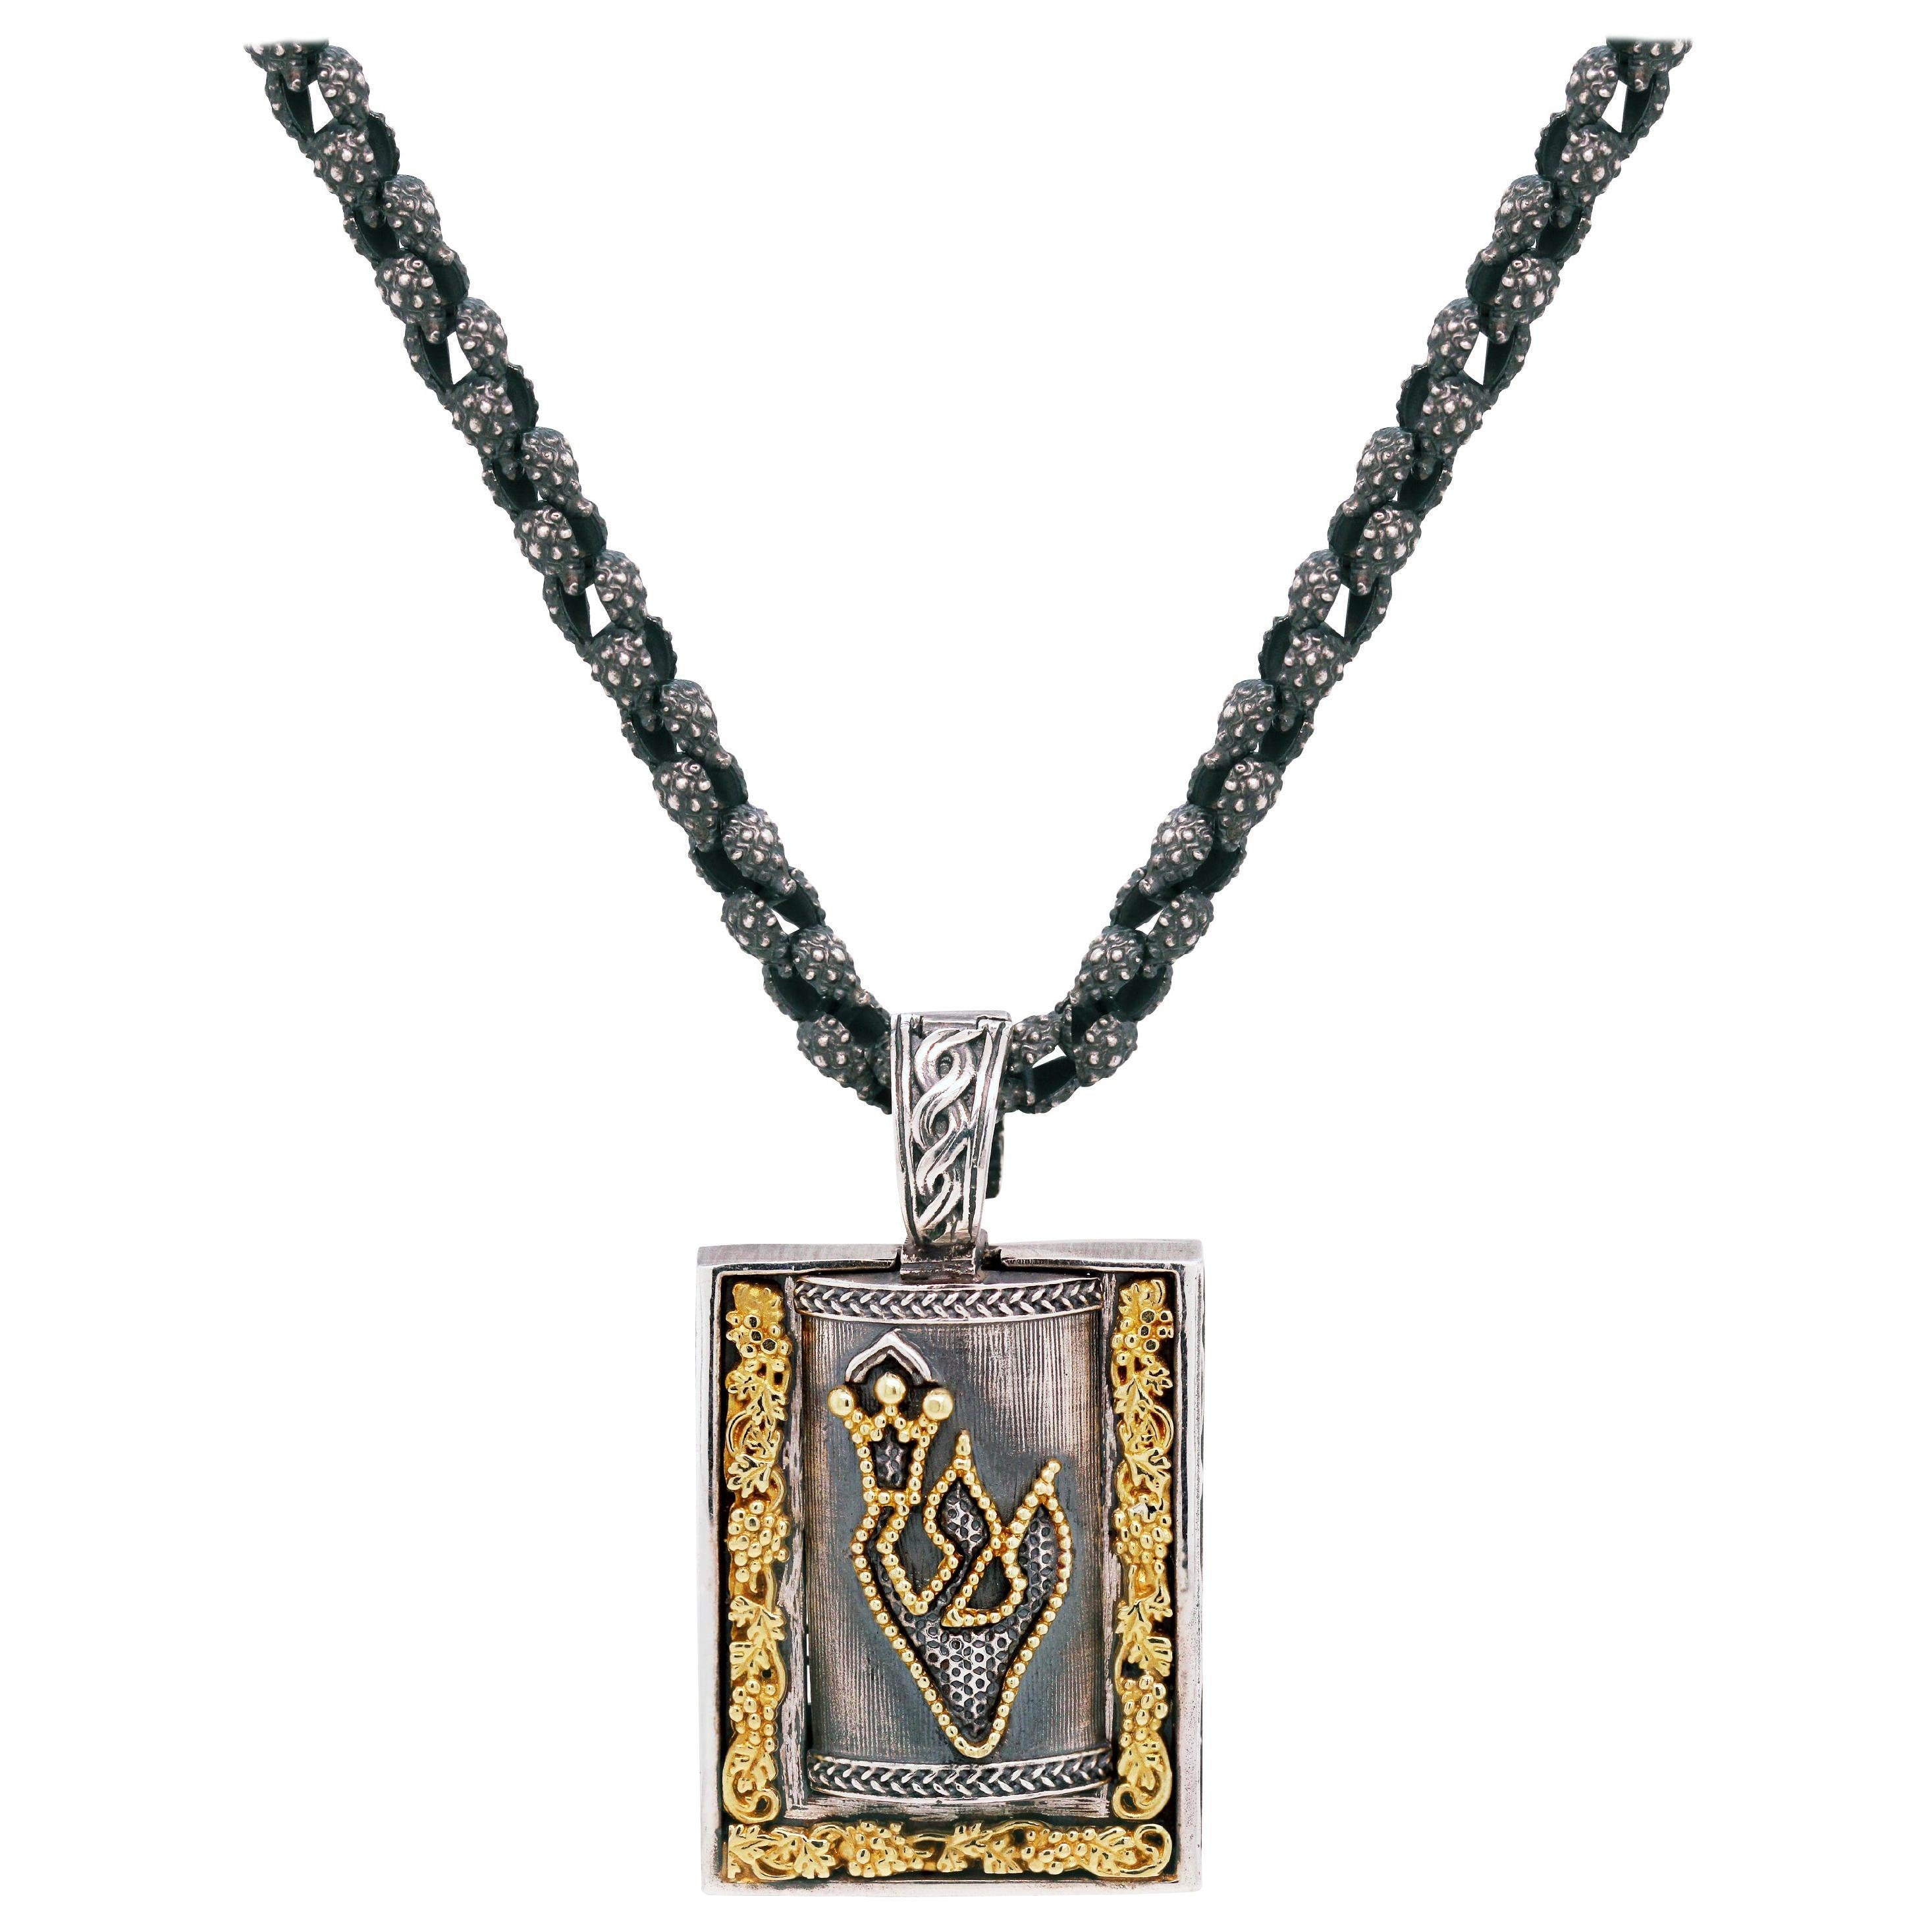 Stambolian Aged Silver 18K Gold Jewish Mezuzah Pendant Necklace with Chain

NO RESERVE PRICE

Pendant is a locket that opens to store a prayer. This state-of-the-art Mezuzah is finished in the Stambolian Aged Silver, the yellow is solid 18K